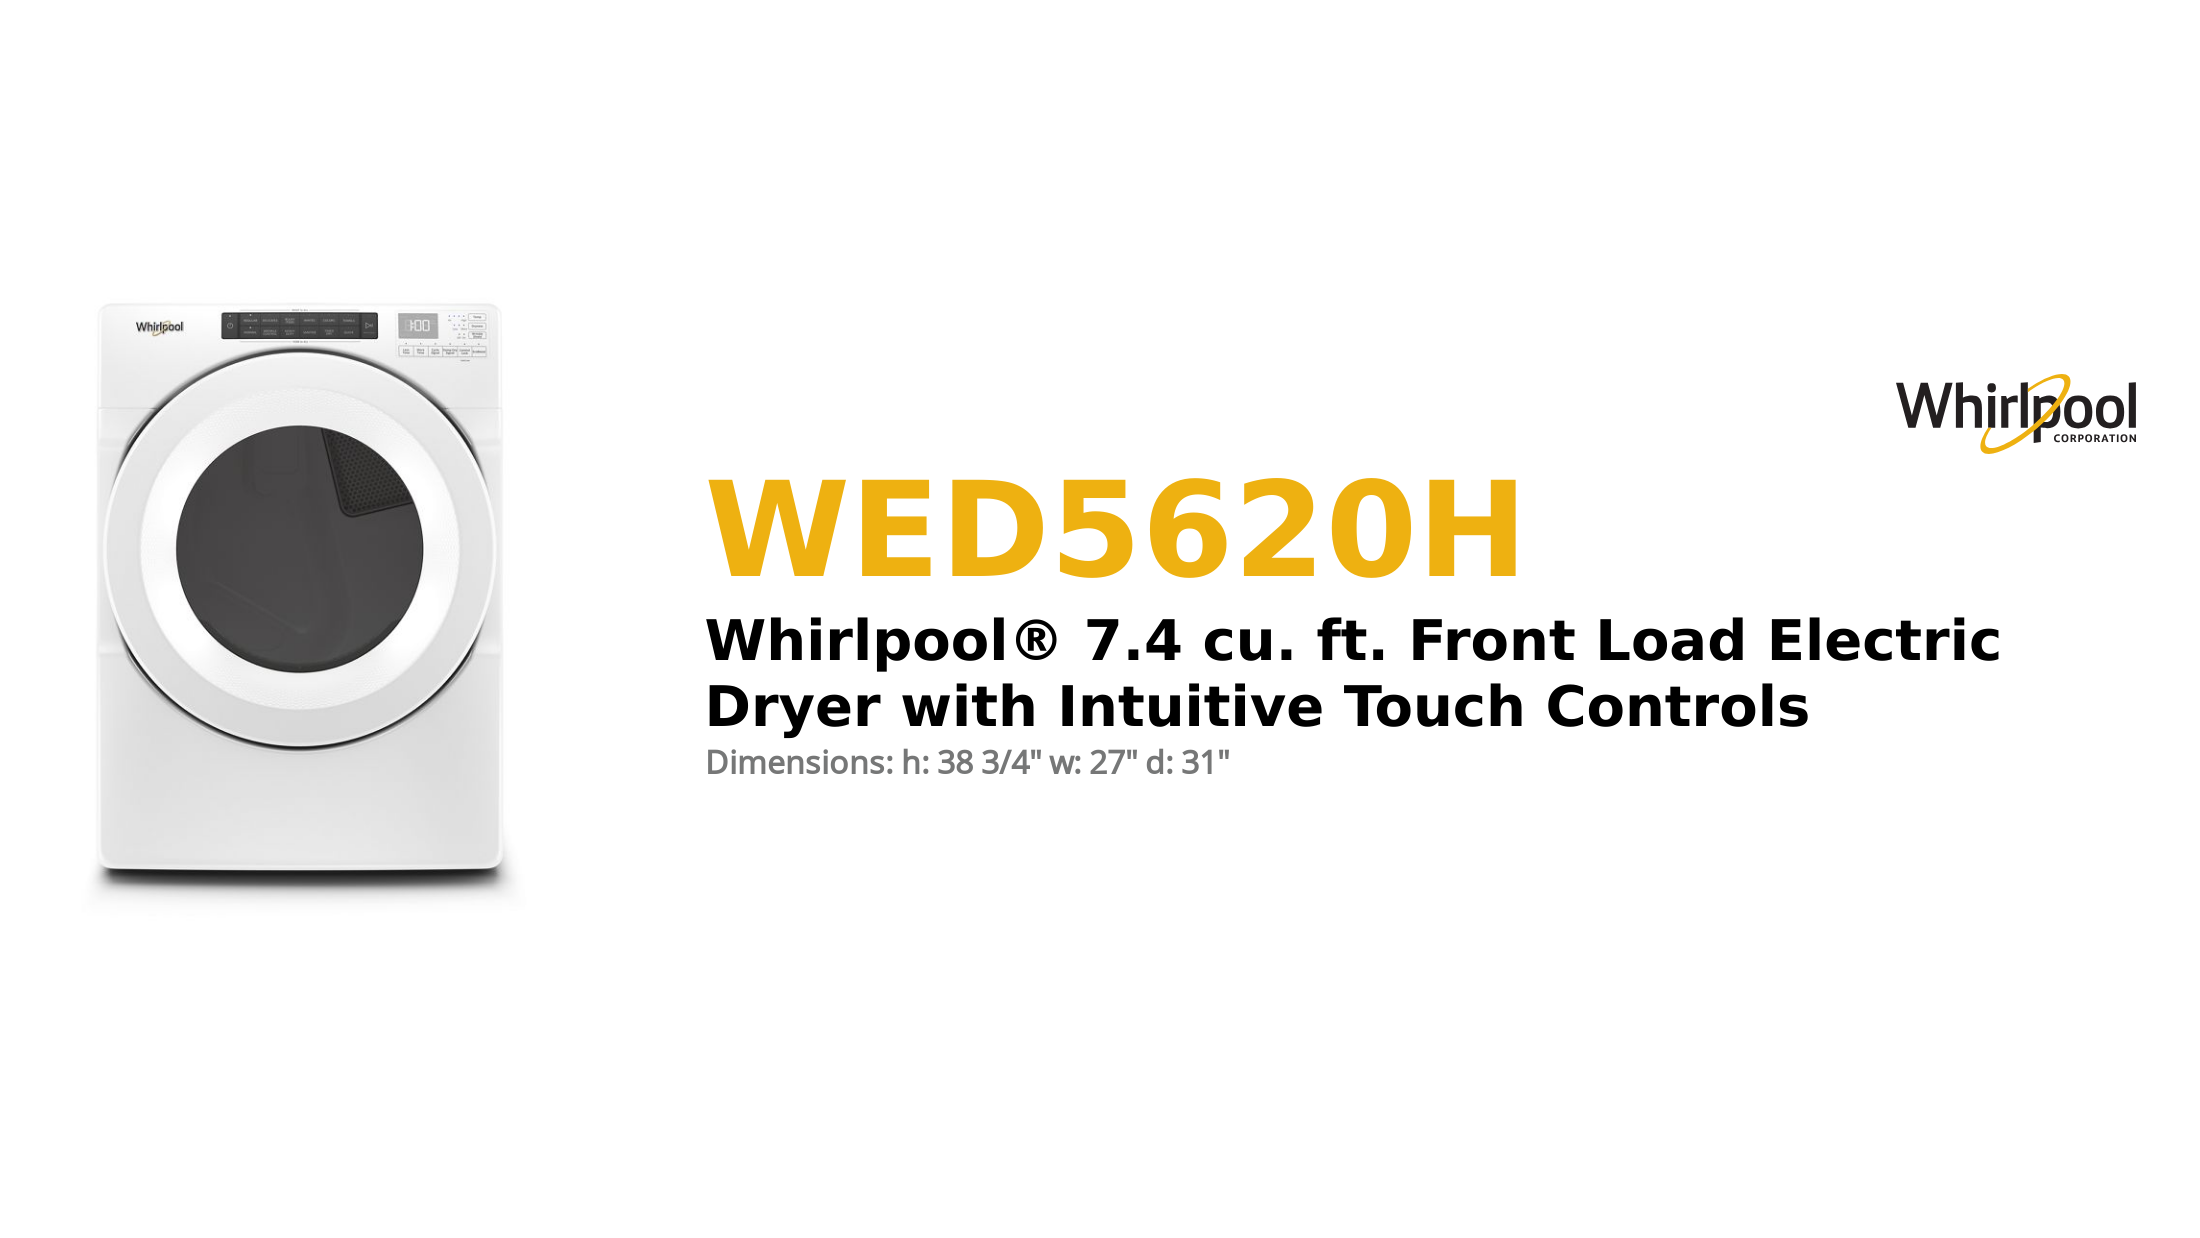 Whirlpool® 7.4 cu. ft. Front Load Electric Dryer with Intuitive Touch Controls
 